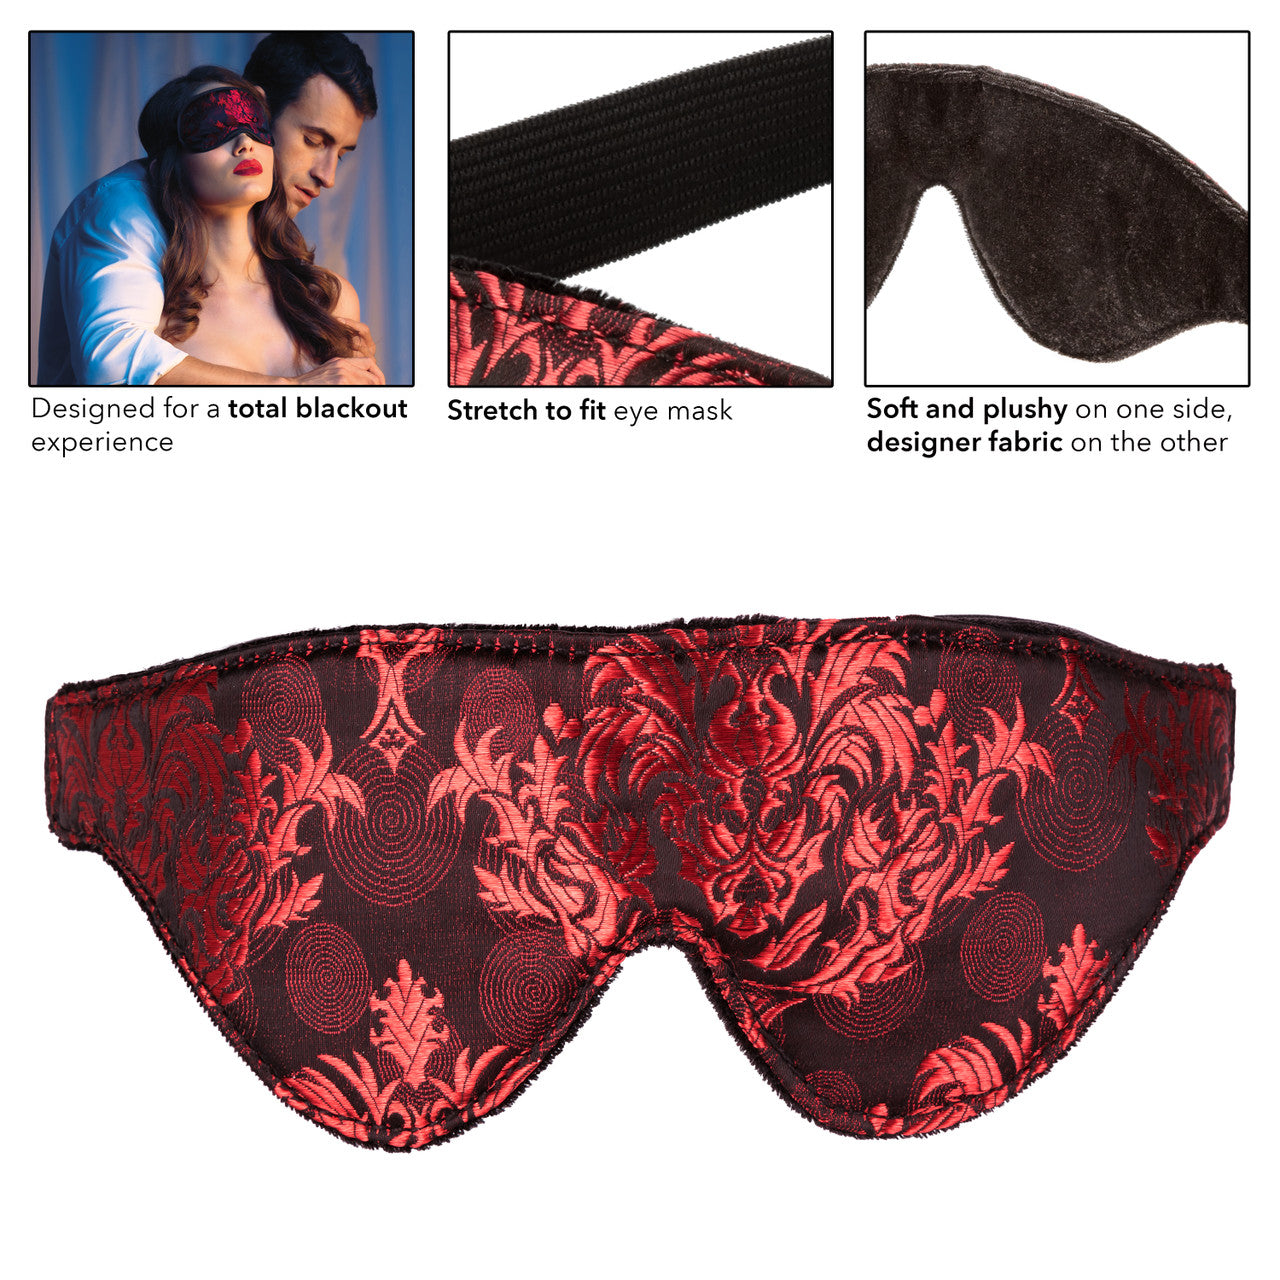 Scandal Blackout Eye Mask - Thorn & Feather Sex Toy Canada